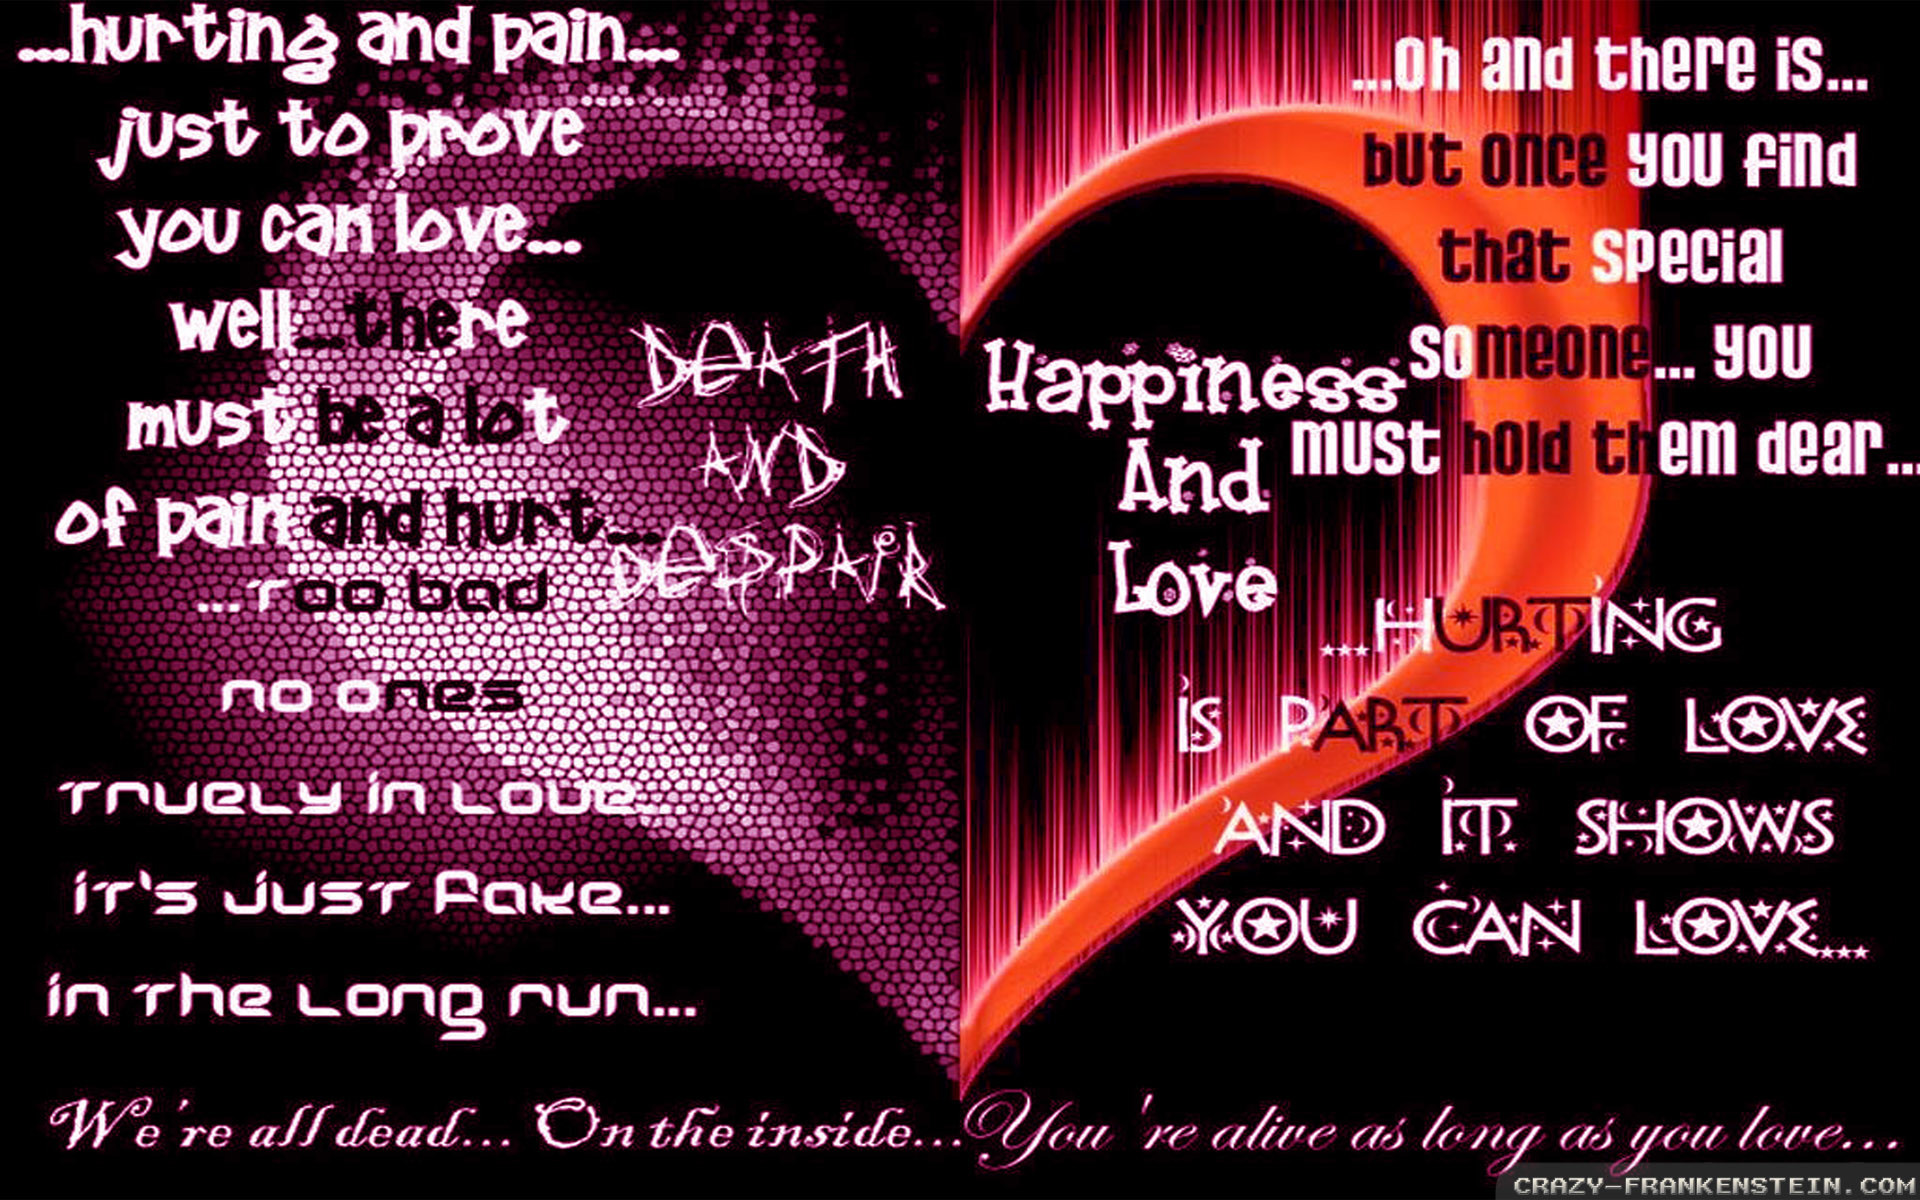 1920x1200 Wallpaper: Words of Love and hate wallpapers. Resolution: 1024x768 |  1280x1024 | 1600x1200. Widescreen Res: 1440x900 | 1680x1050 | 